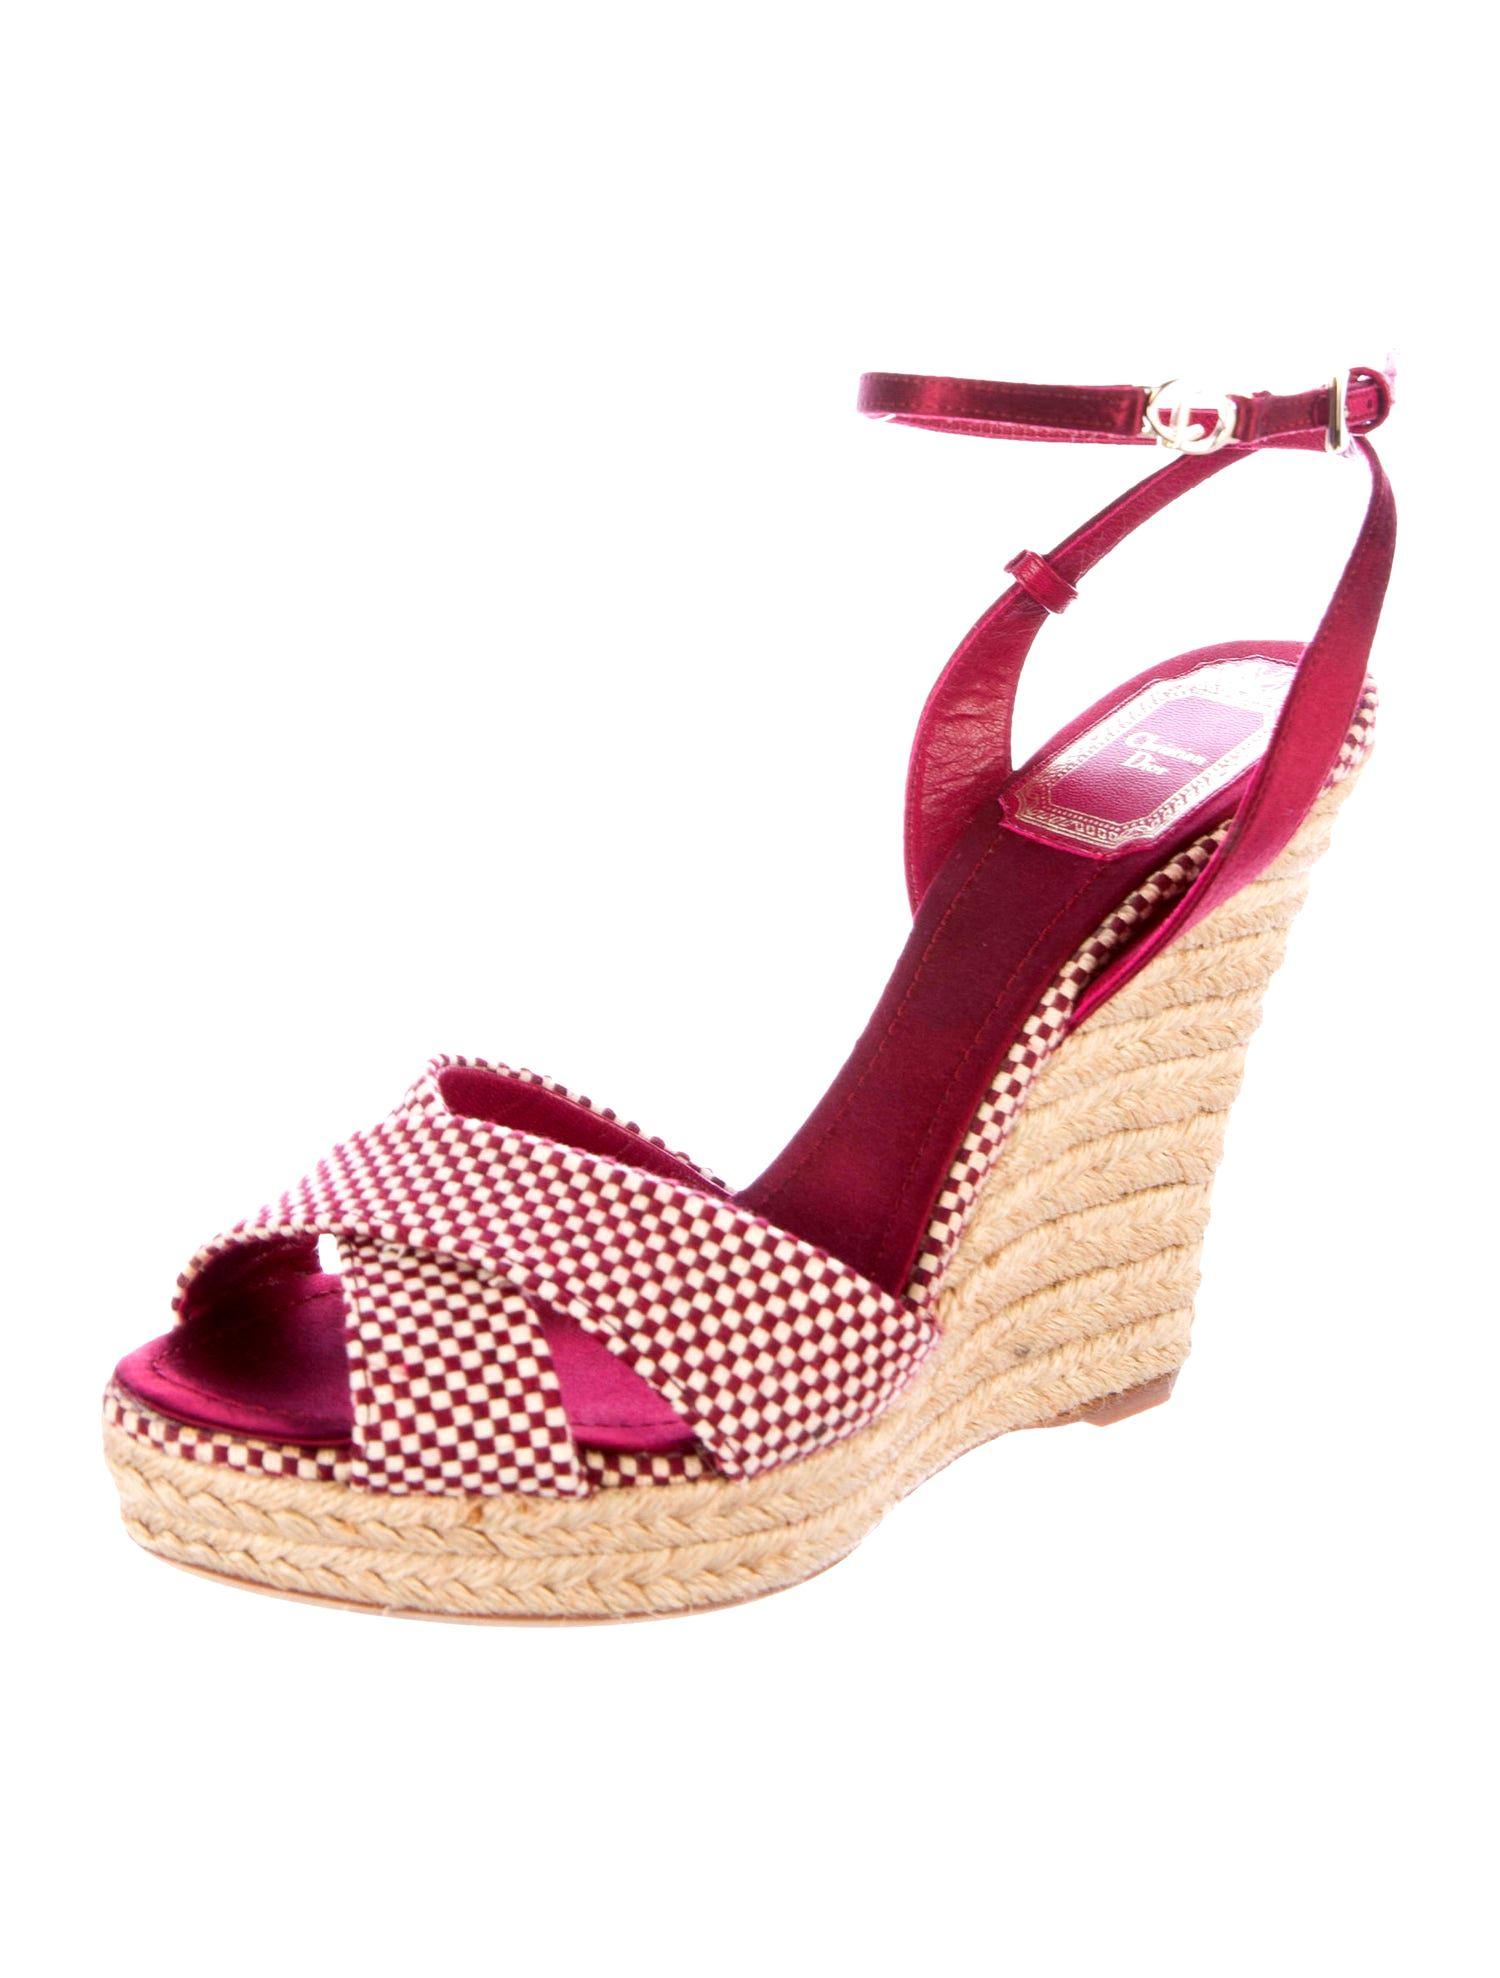 If you're already a fan of wedge heel espadrilles, you'll love this pair Christian Dior - they're set on a jute wedge heel for comfortable lift. 
Wear them on vacation with pretty dresses or cuffed denim.

Beautiful burgundy and creme satin